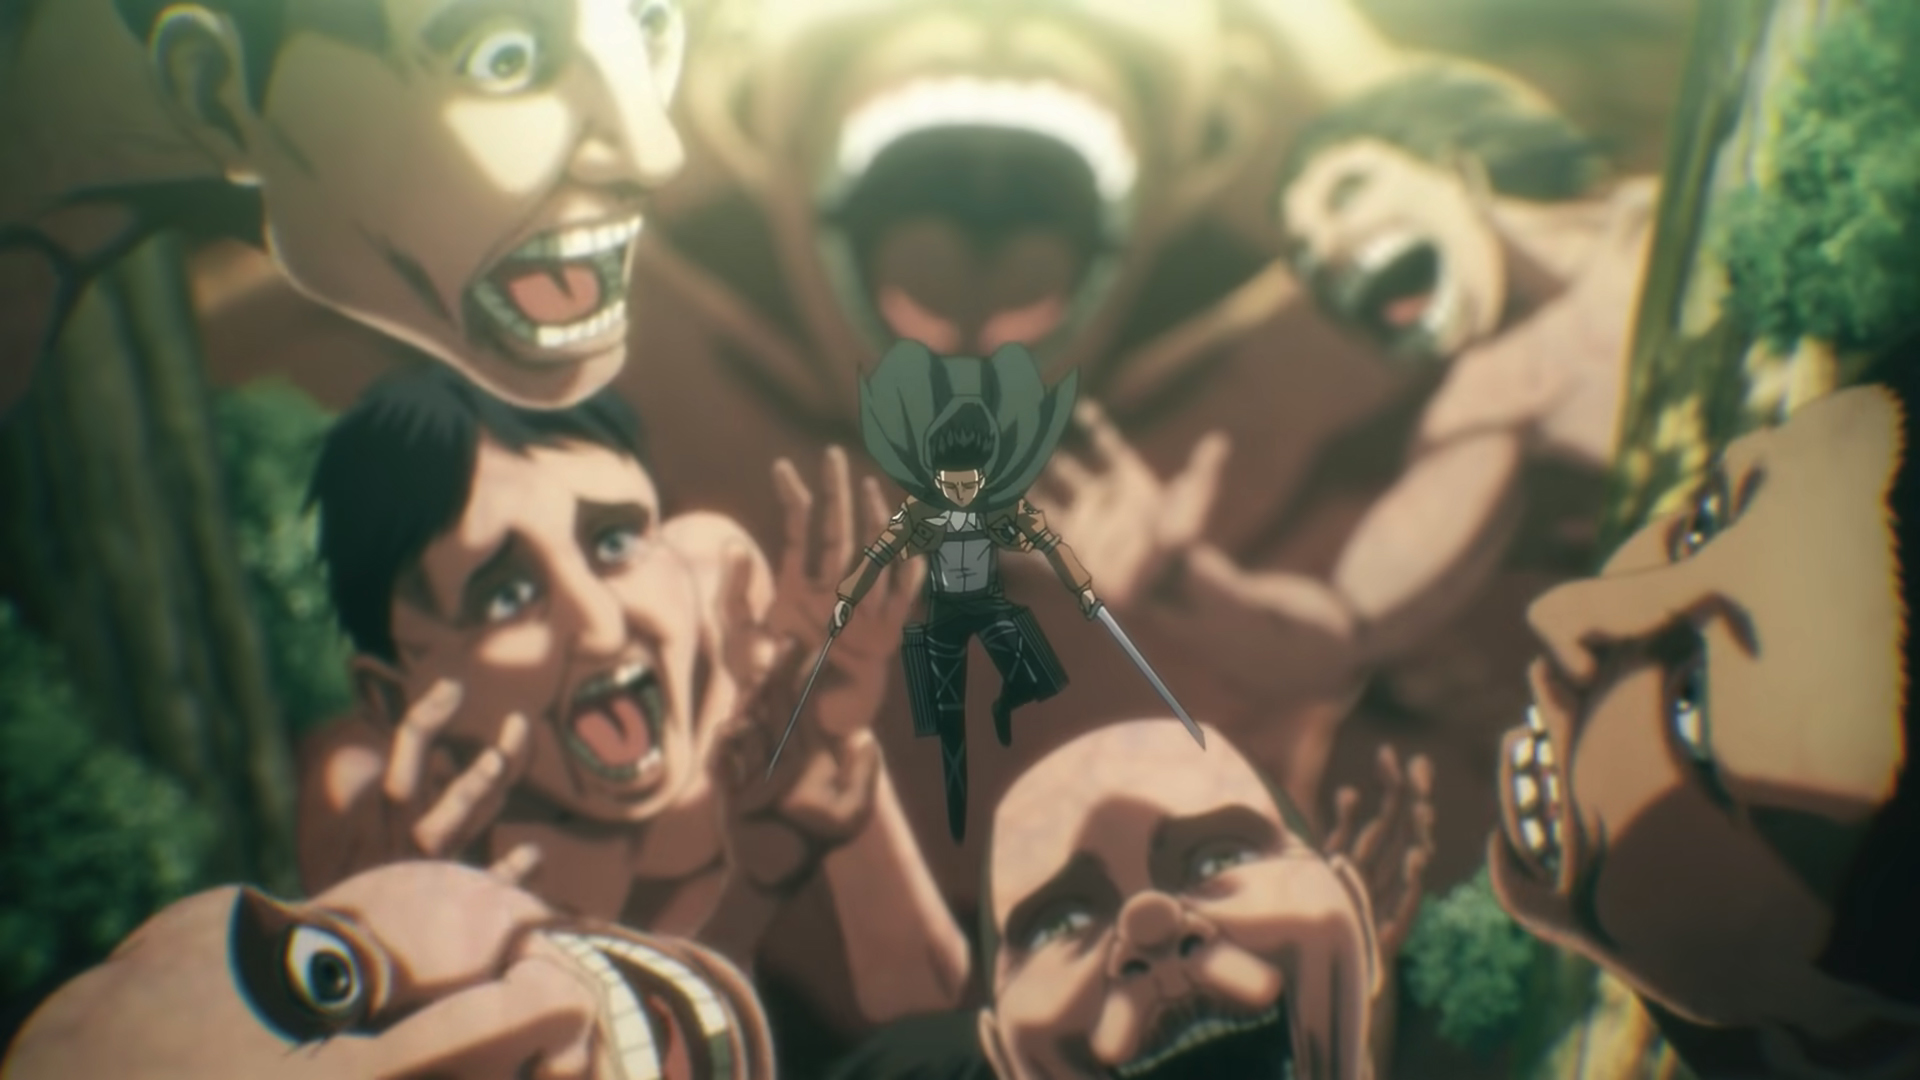 Attack On Titan Season 4 What You Need To Know About The Hit Anime Series Techradar In order to avoid catastrophe zeke is kept far away from eren in a distant forest where. attack on titan season 4 what you need